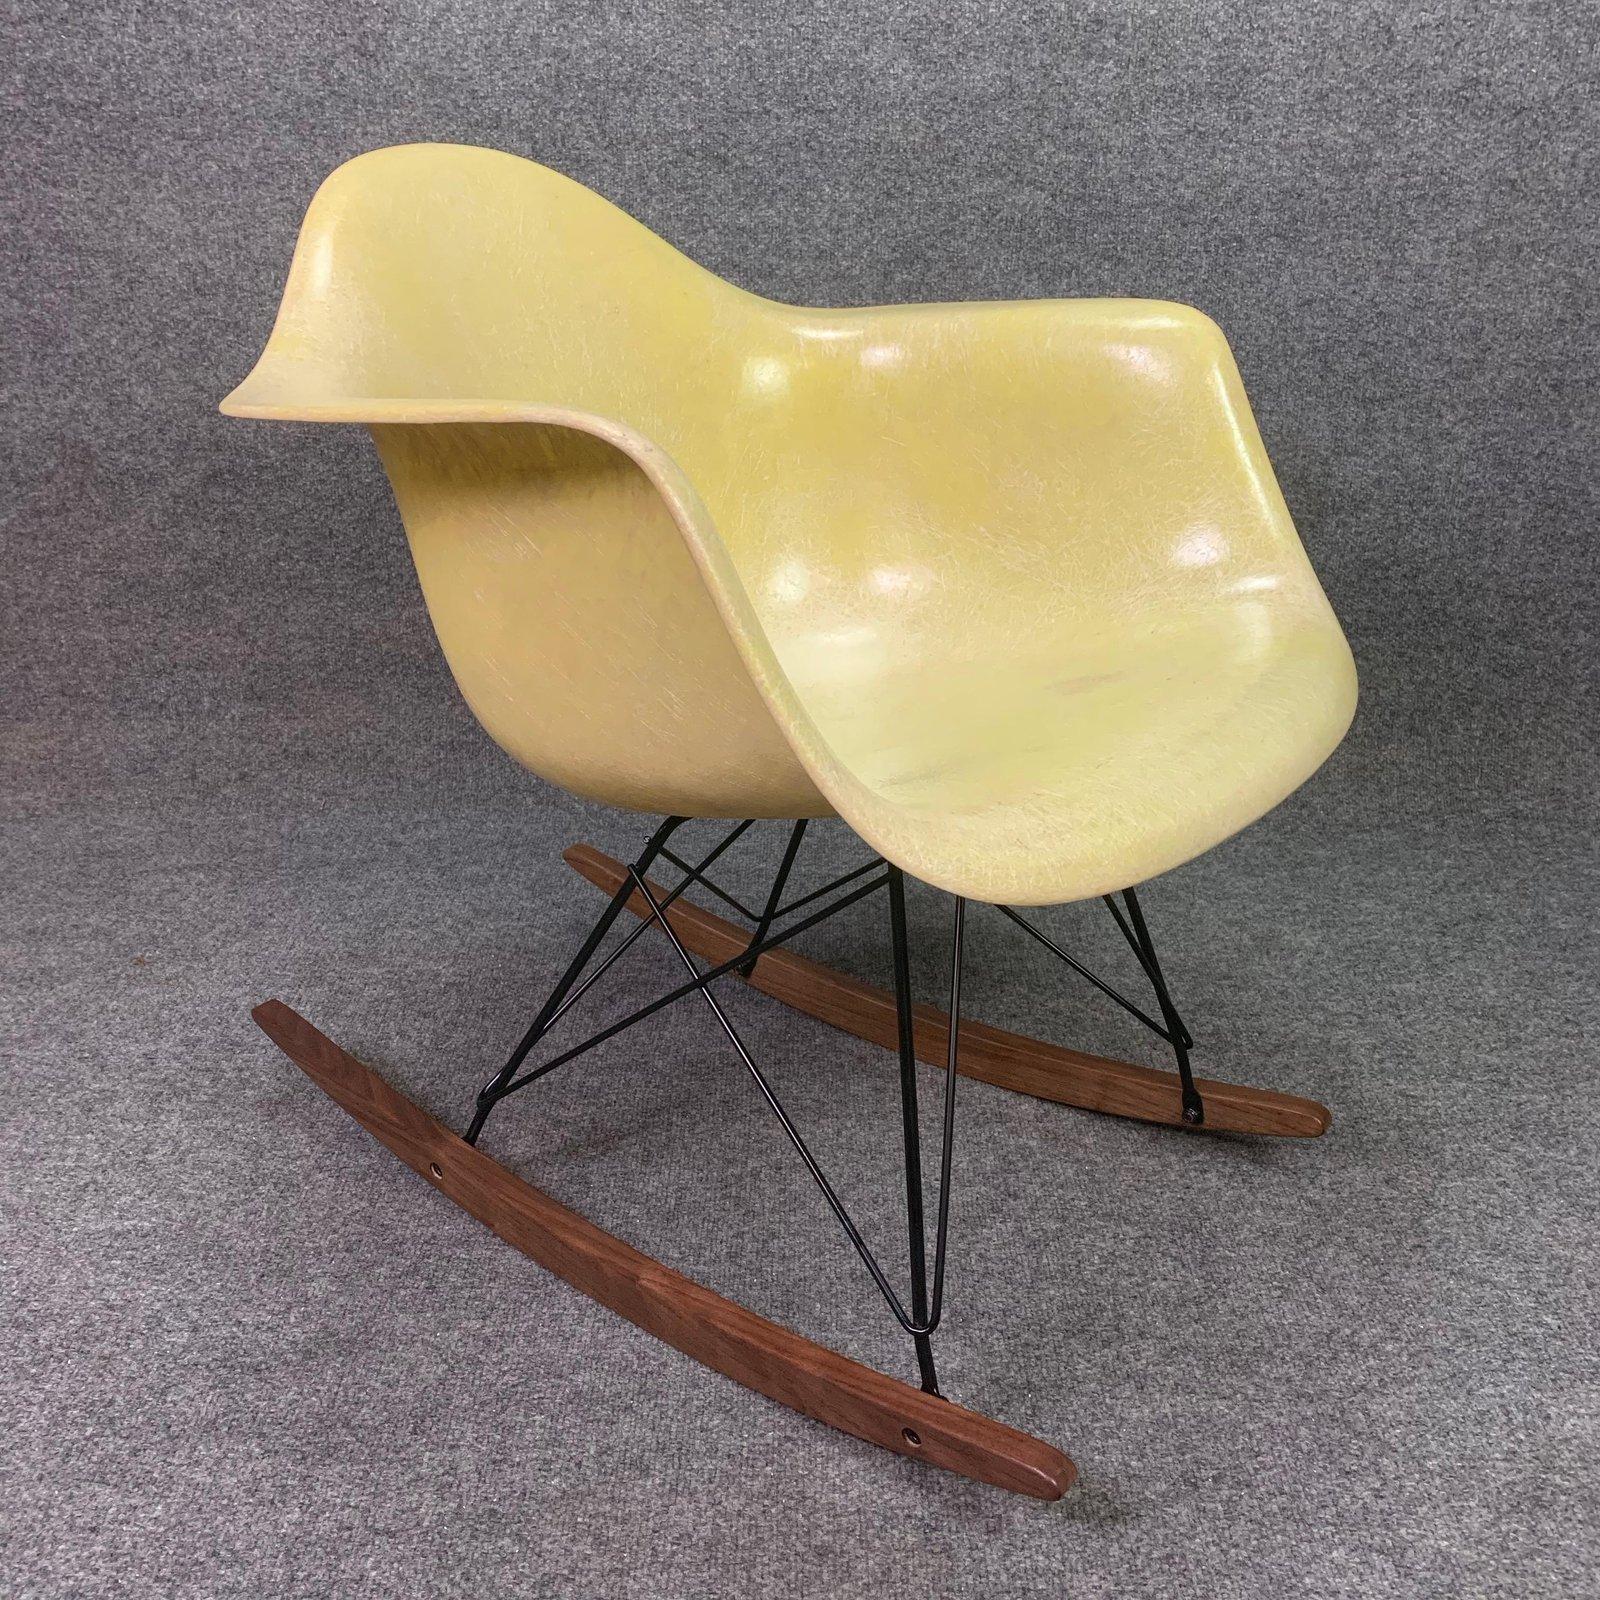 Here is a classic American made fiberglass rocking chair designed by Charles Eames. 
This early 1950's shell, with its pale yellow color and vibrant fiber details, has been cleaned up and received a new gel coat finish. All the the shock mounts are